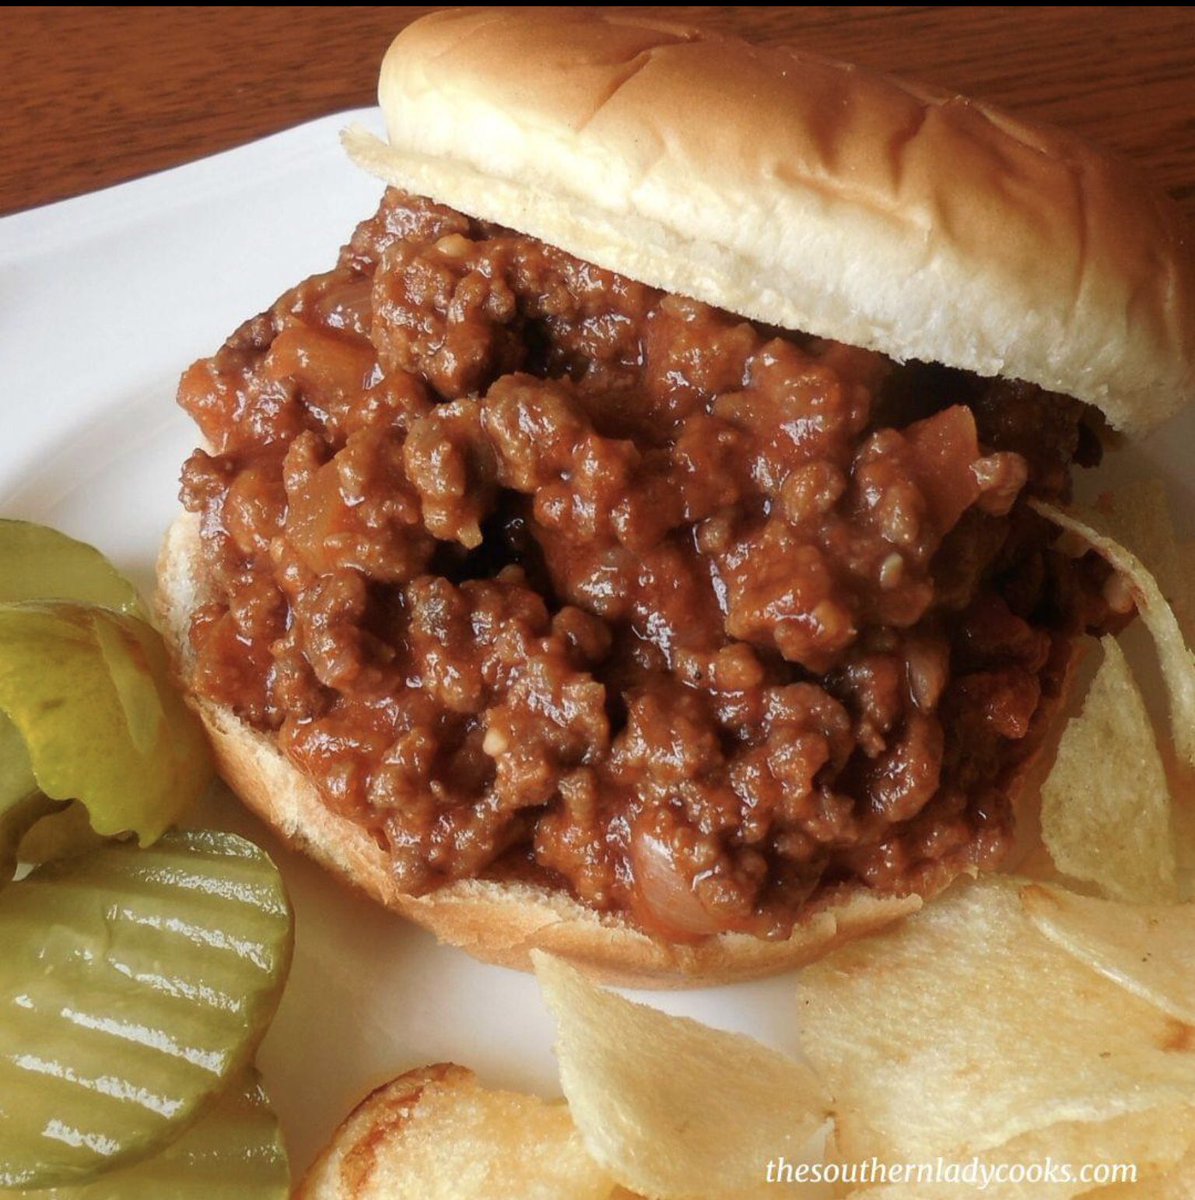 RECIPE ➡ thesouthernladycooks.com/sloppy-joes-cr…

This recipe for Sloppy Joes is our favorite. We make this a lot for a quick and easy dinner. #sloppyjoes #dinner